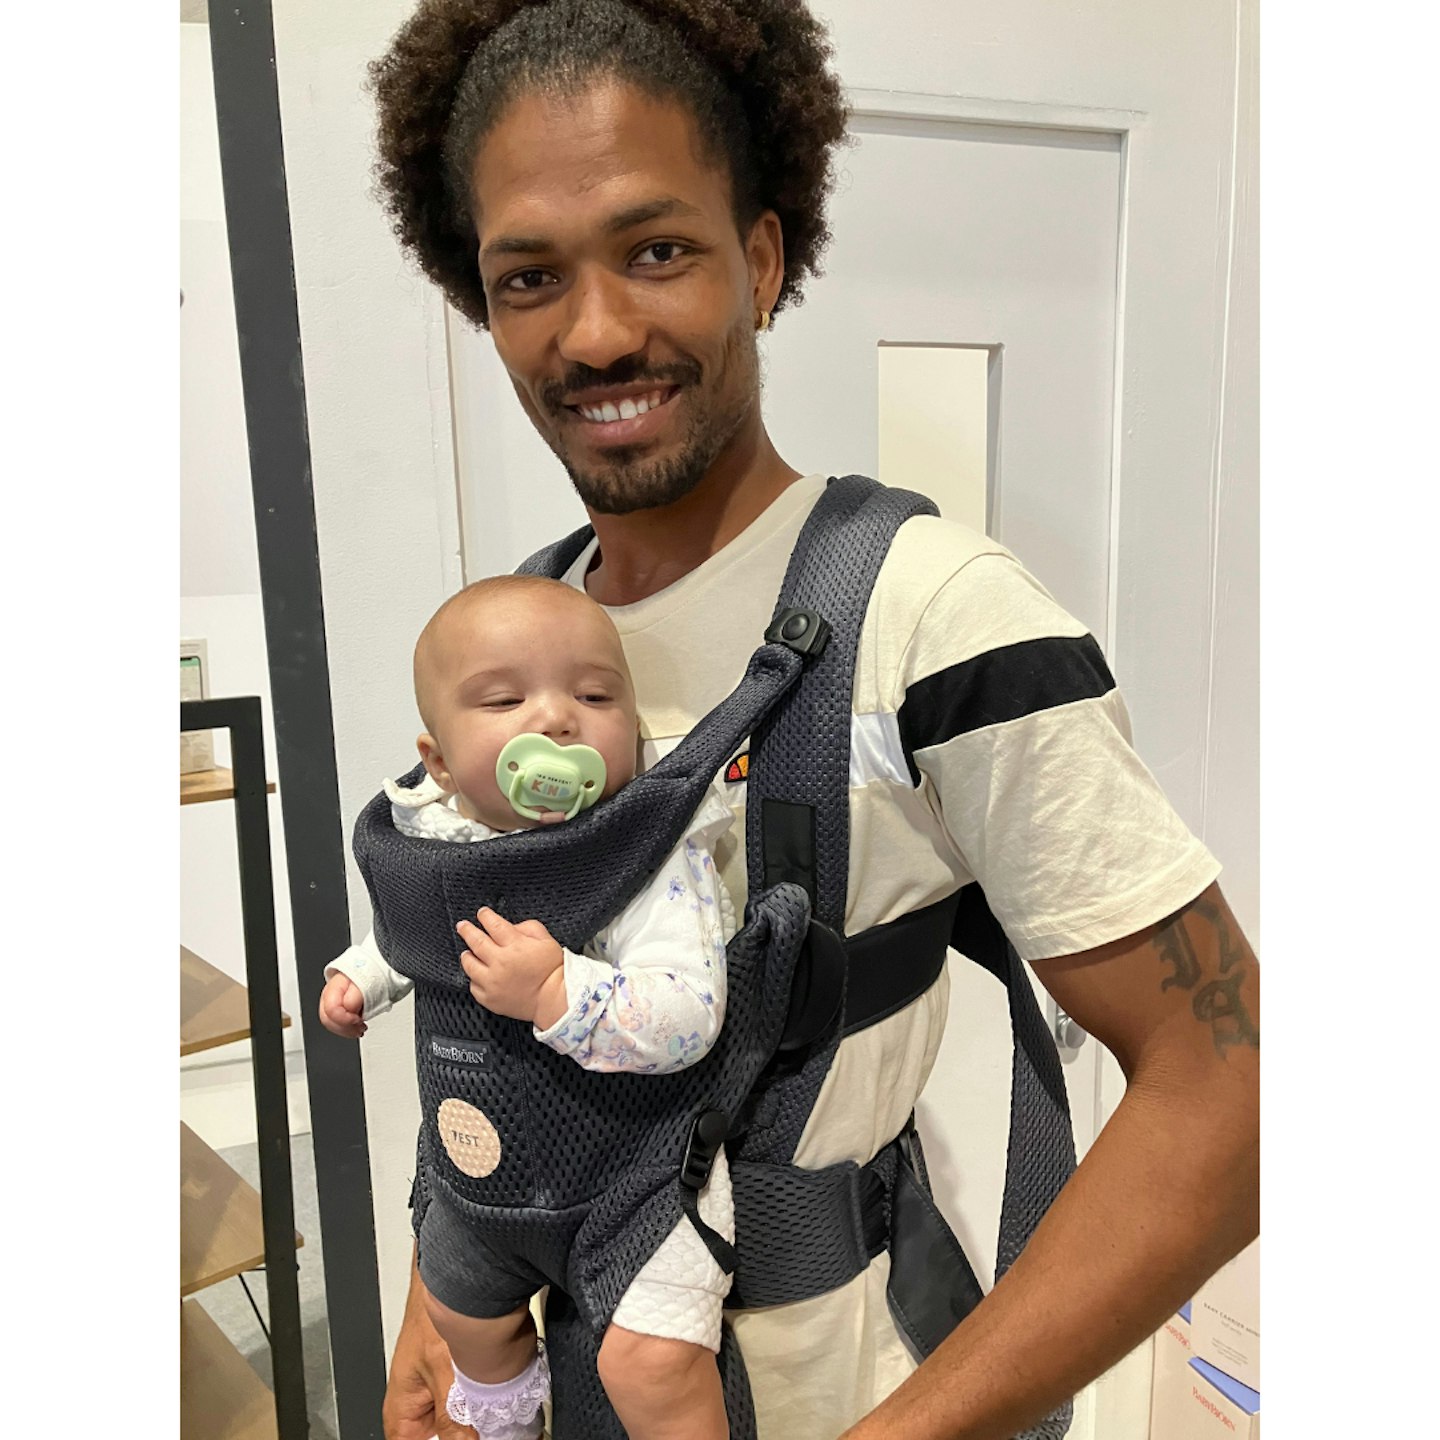 Babybjorn carrier move review